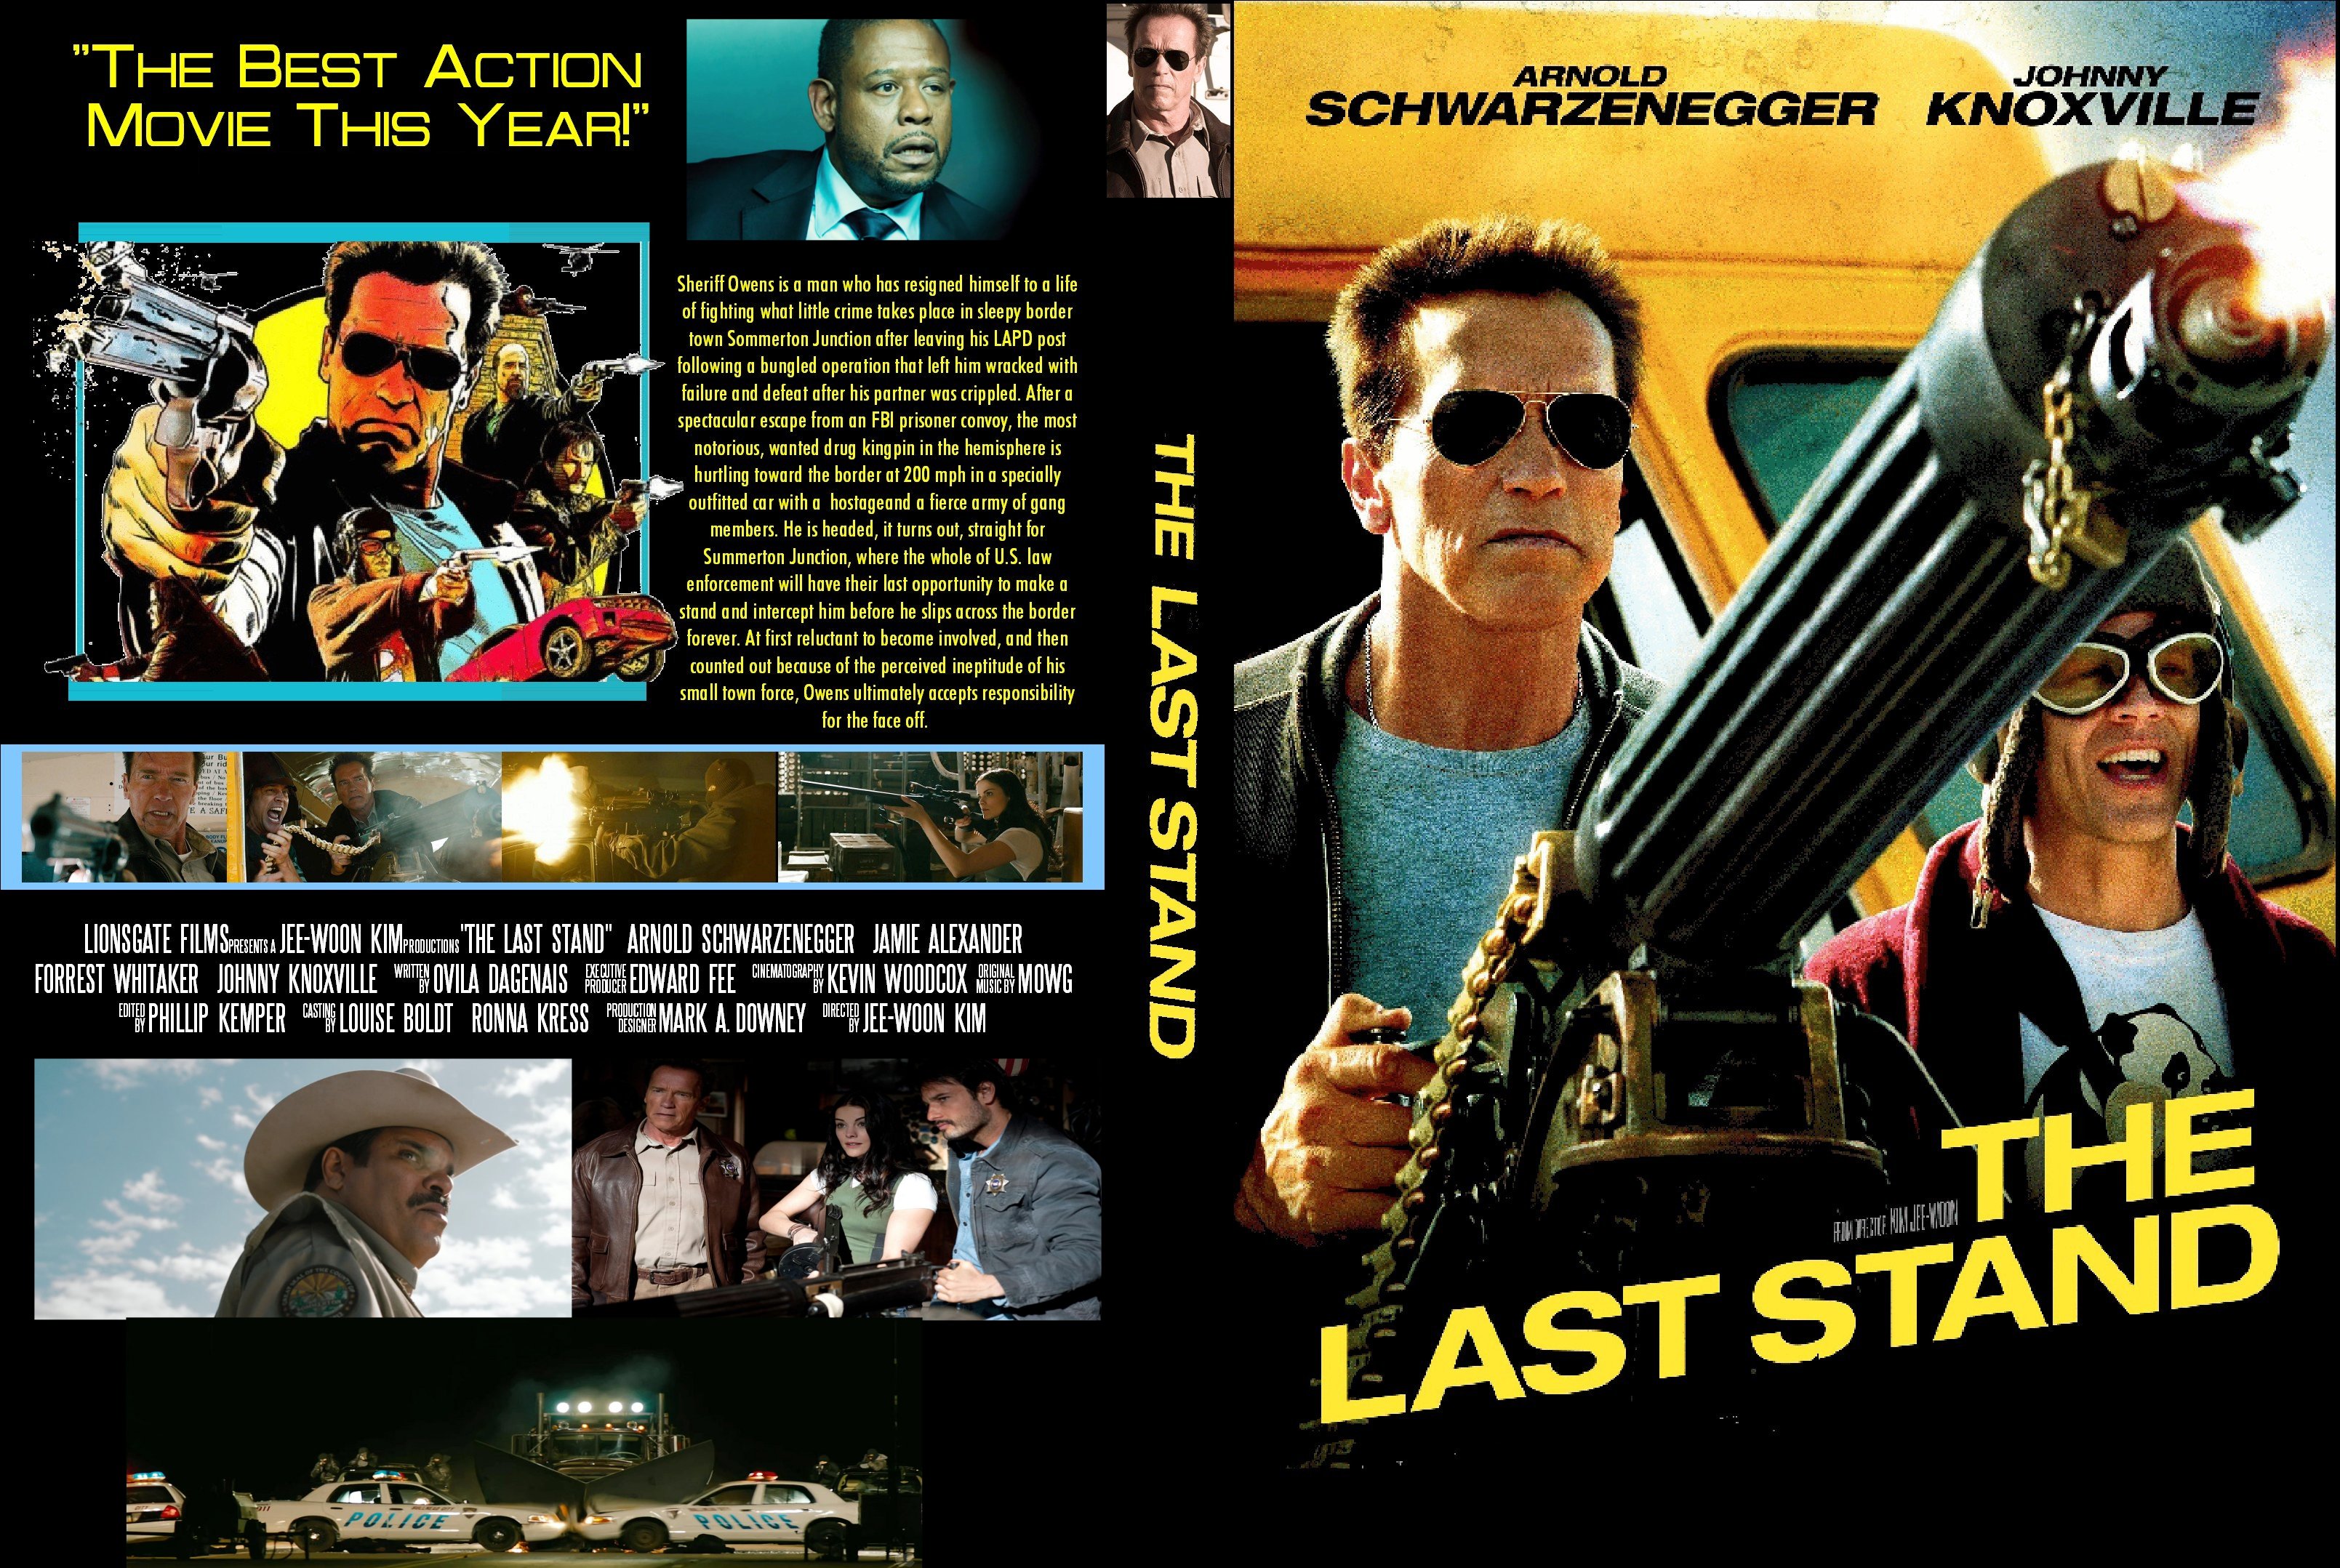 Gojo last stand. The last Stand 2013. The last Stand Cover 2013. The last Stand 2013 poster.